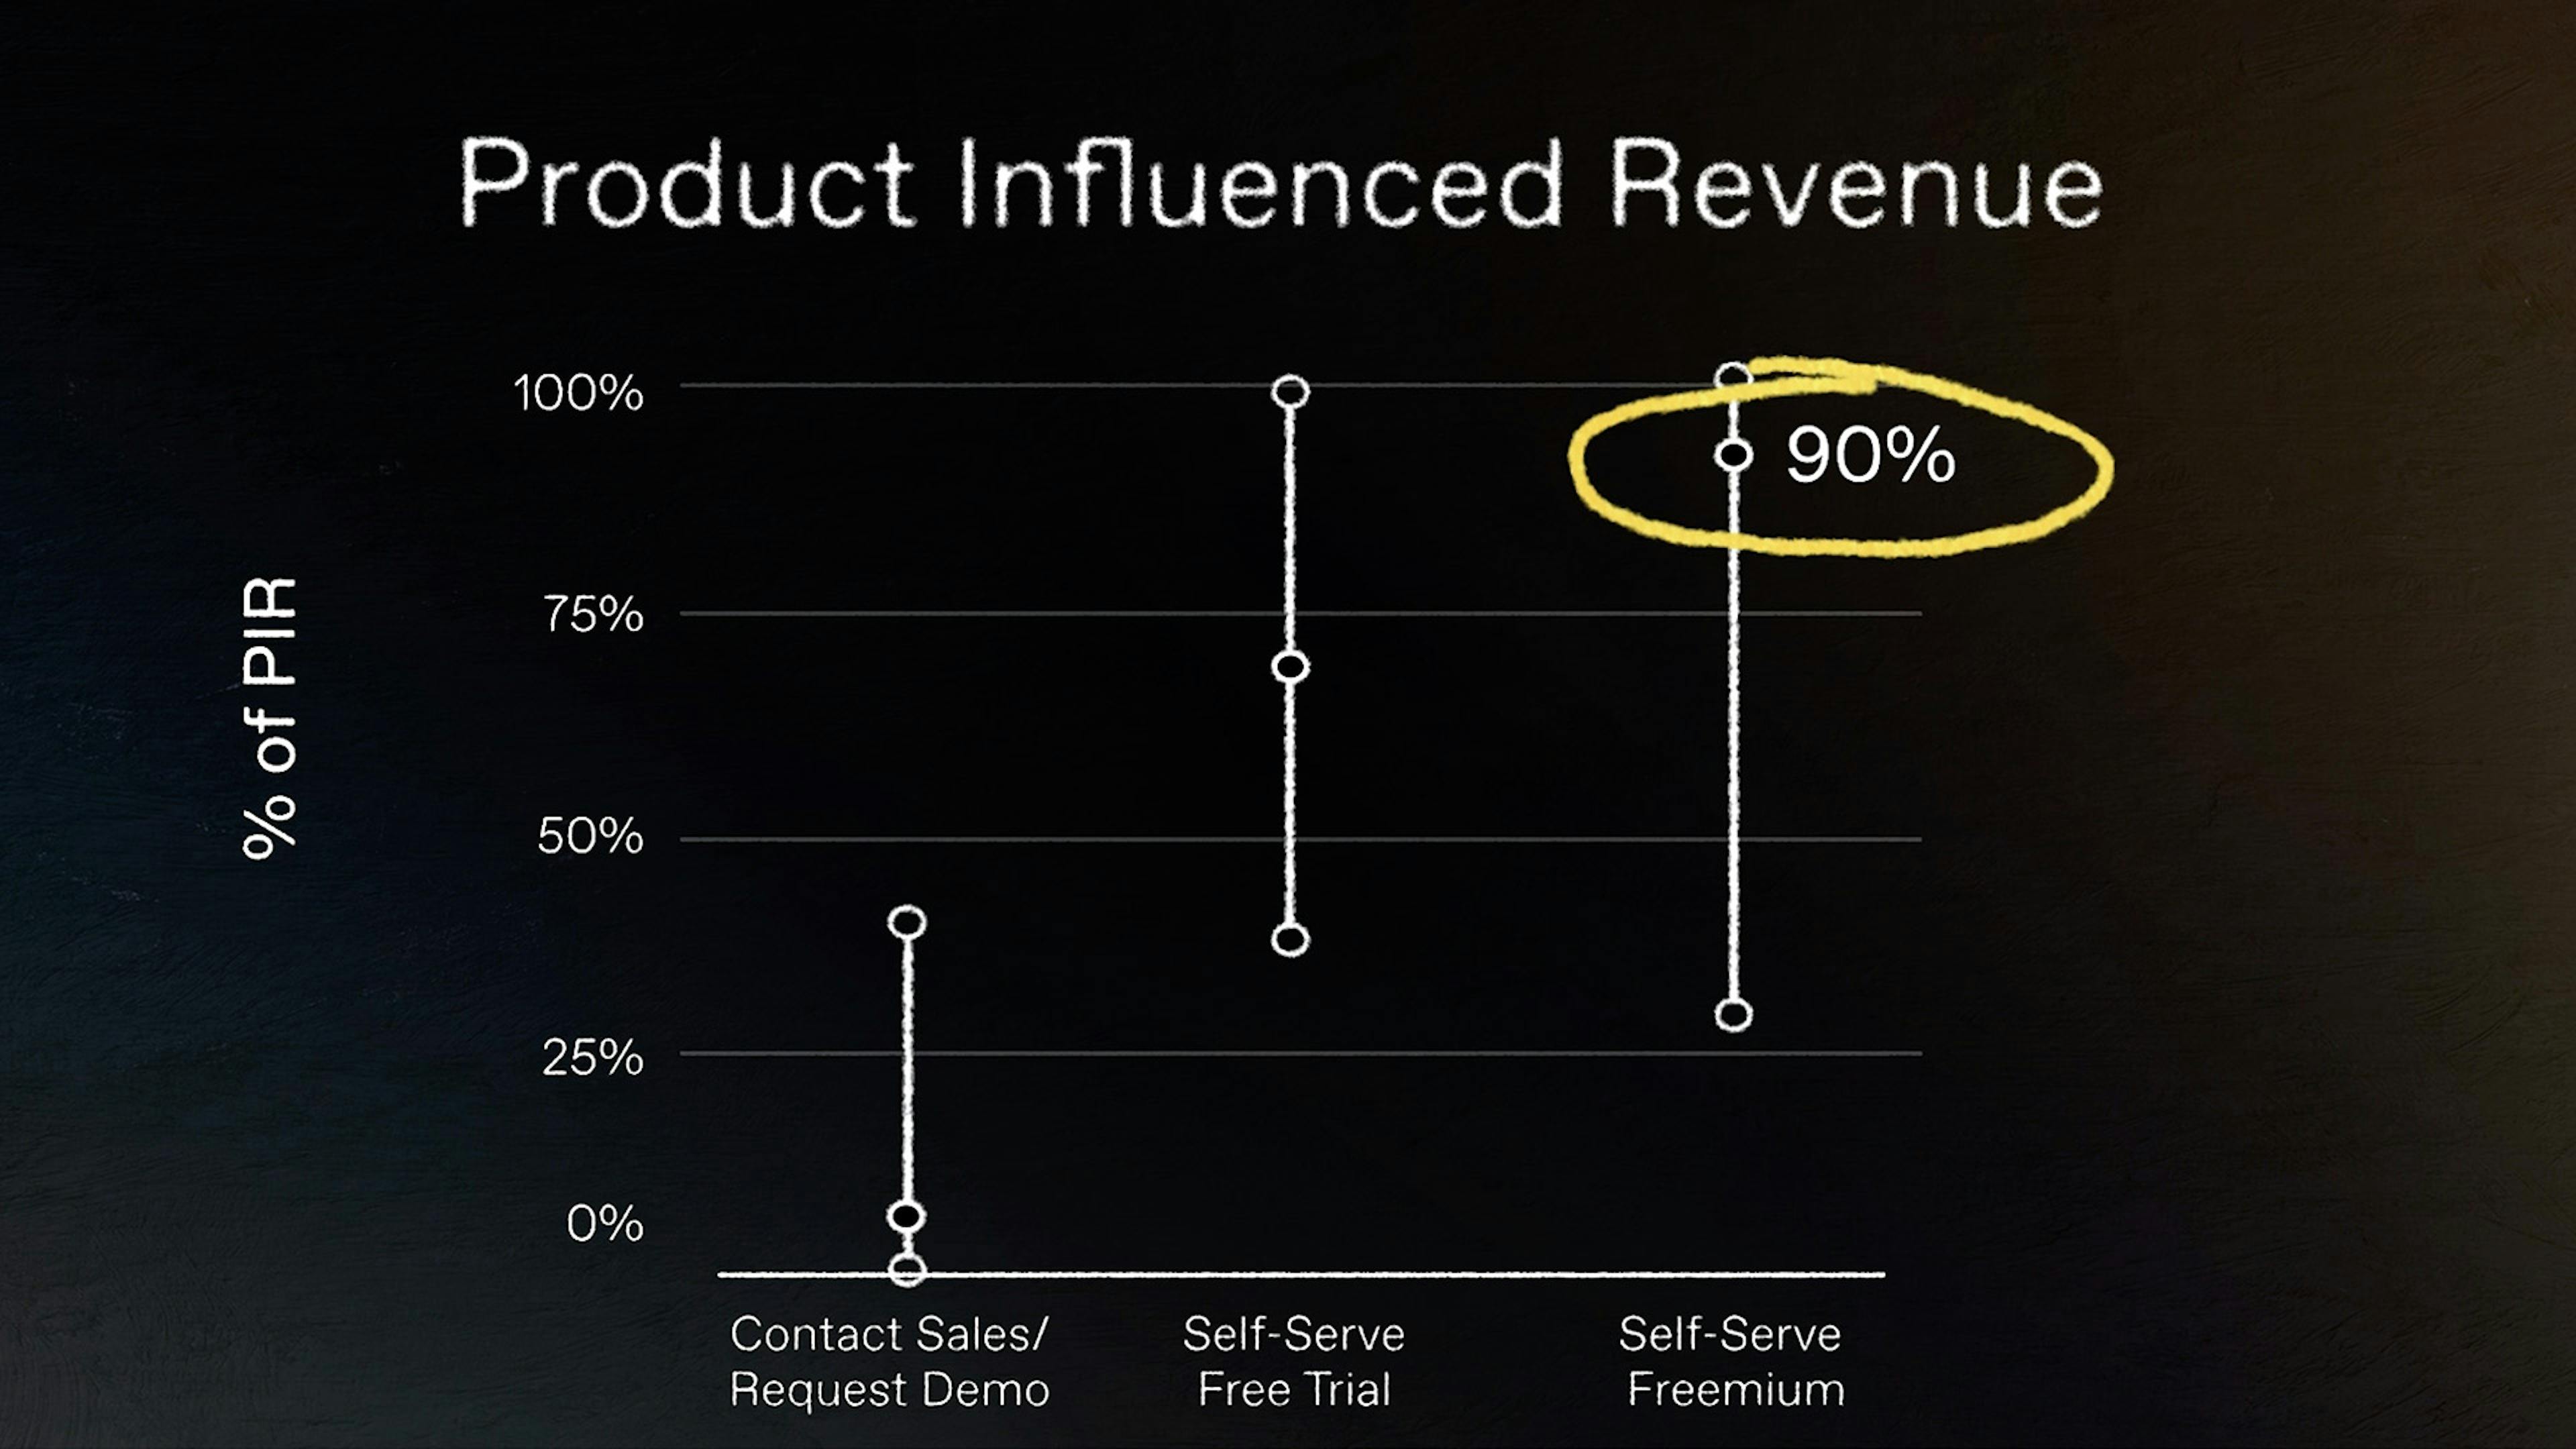 Product Influenced Revenue